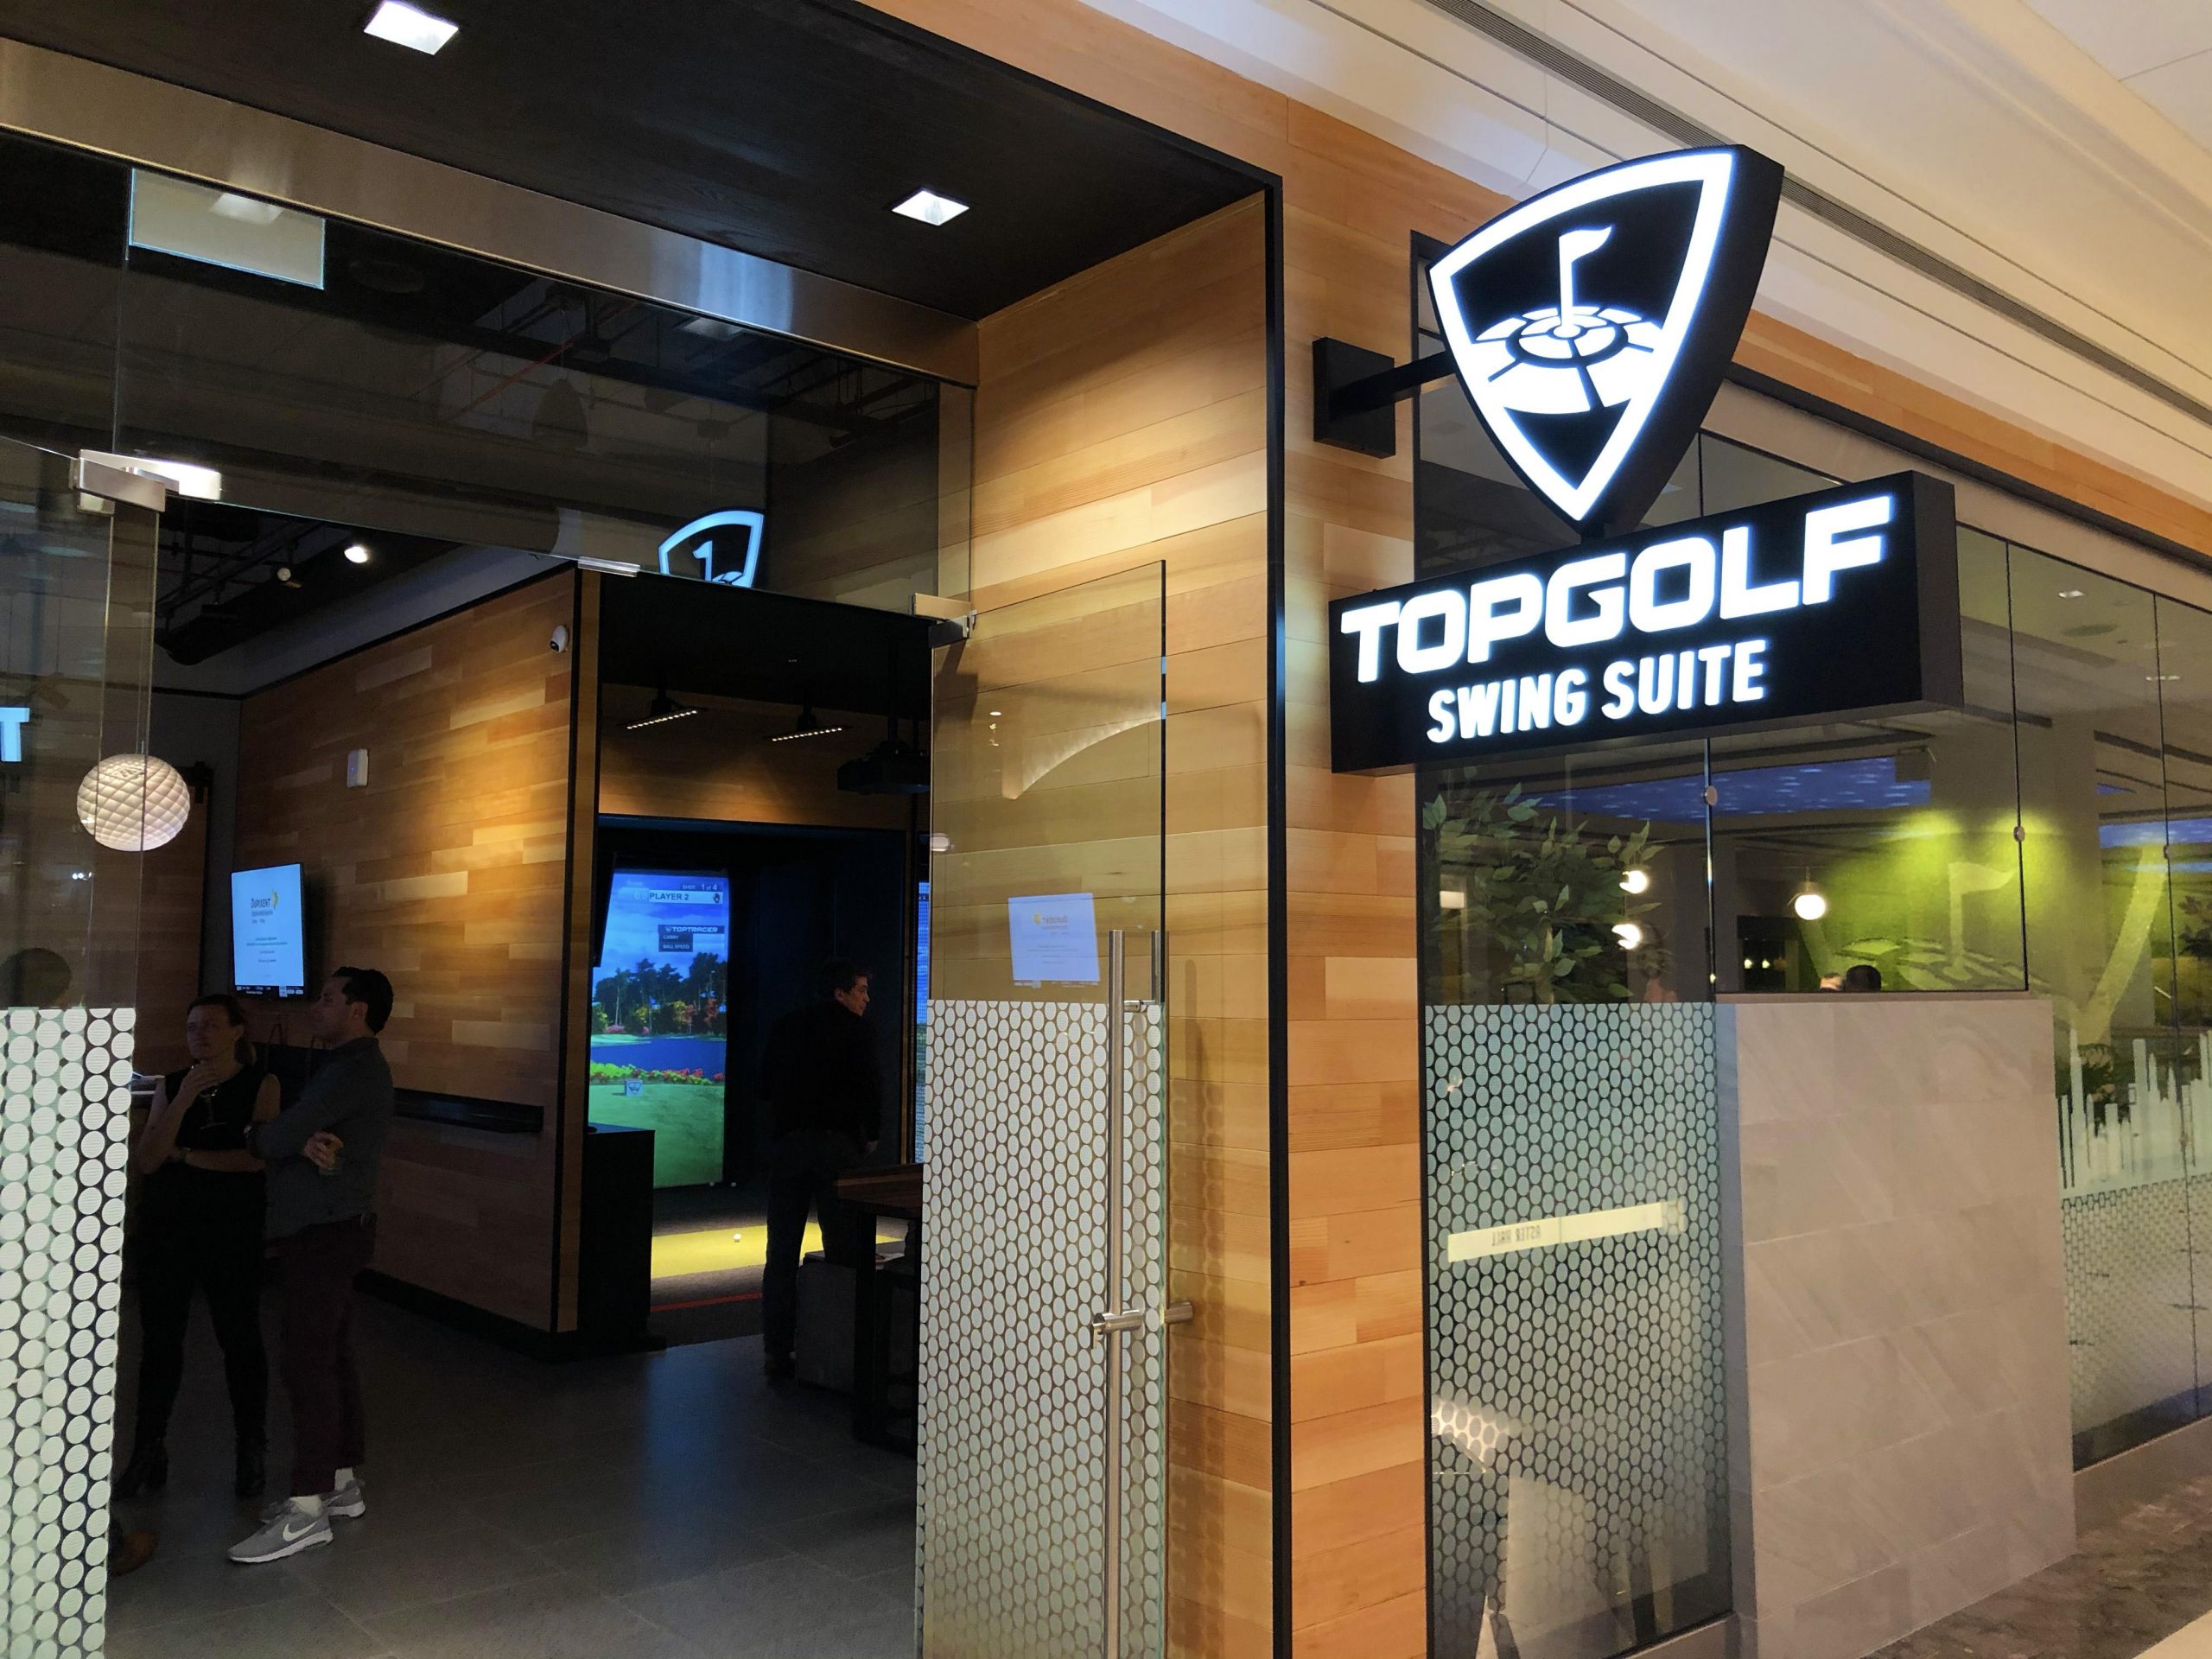 Weekly Lunch League Tournaments at Topgolf Swing Suite 900